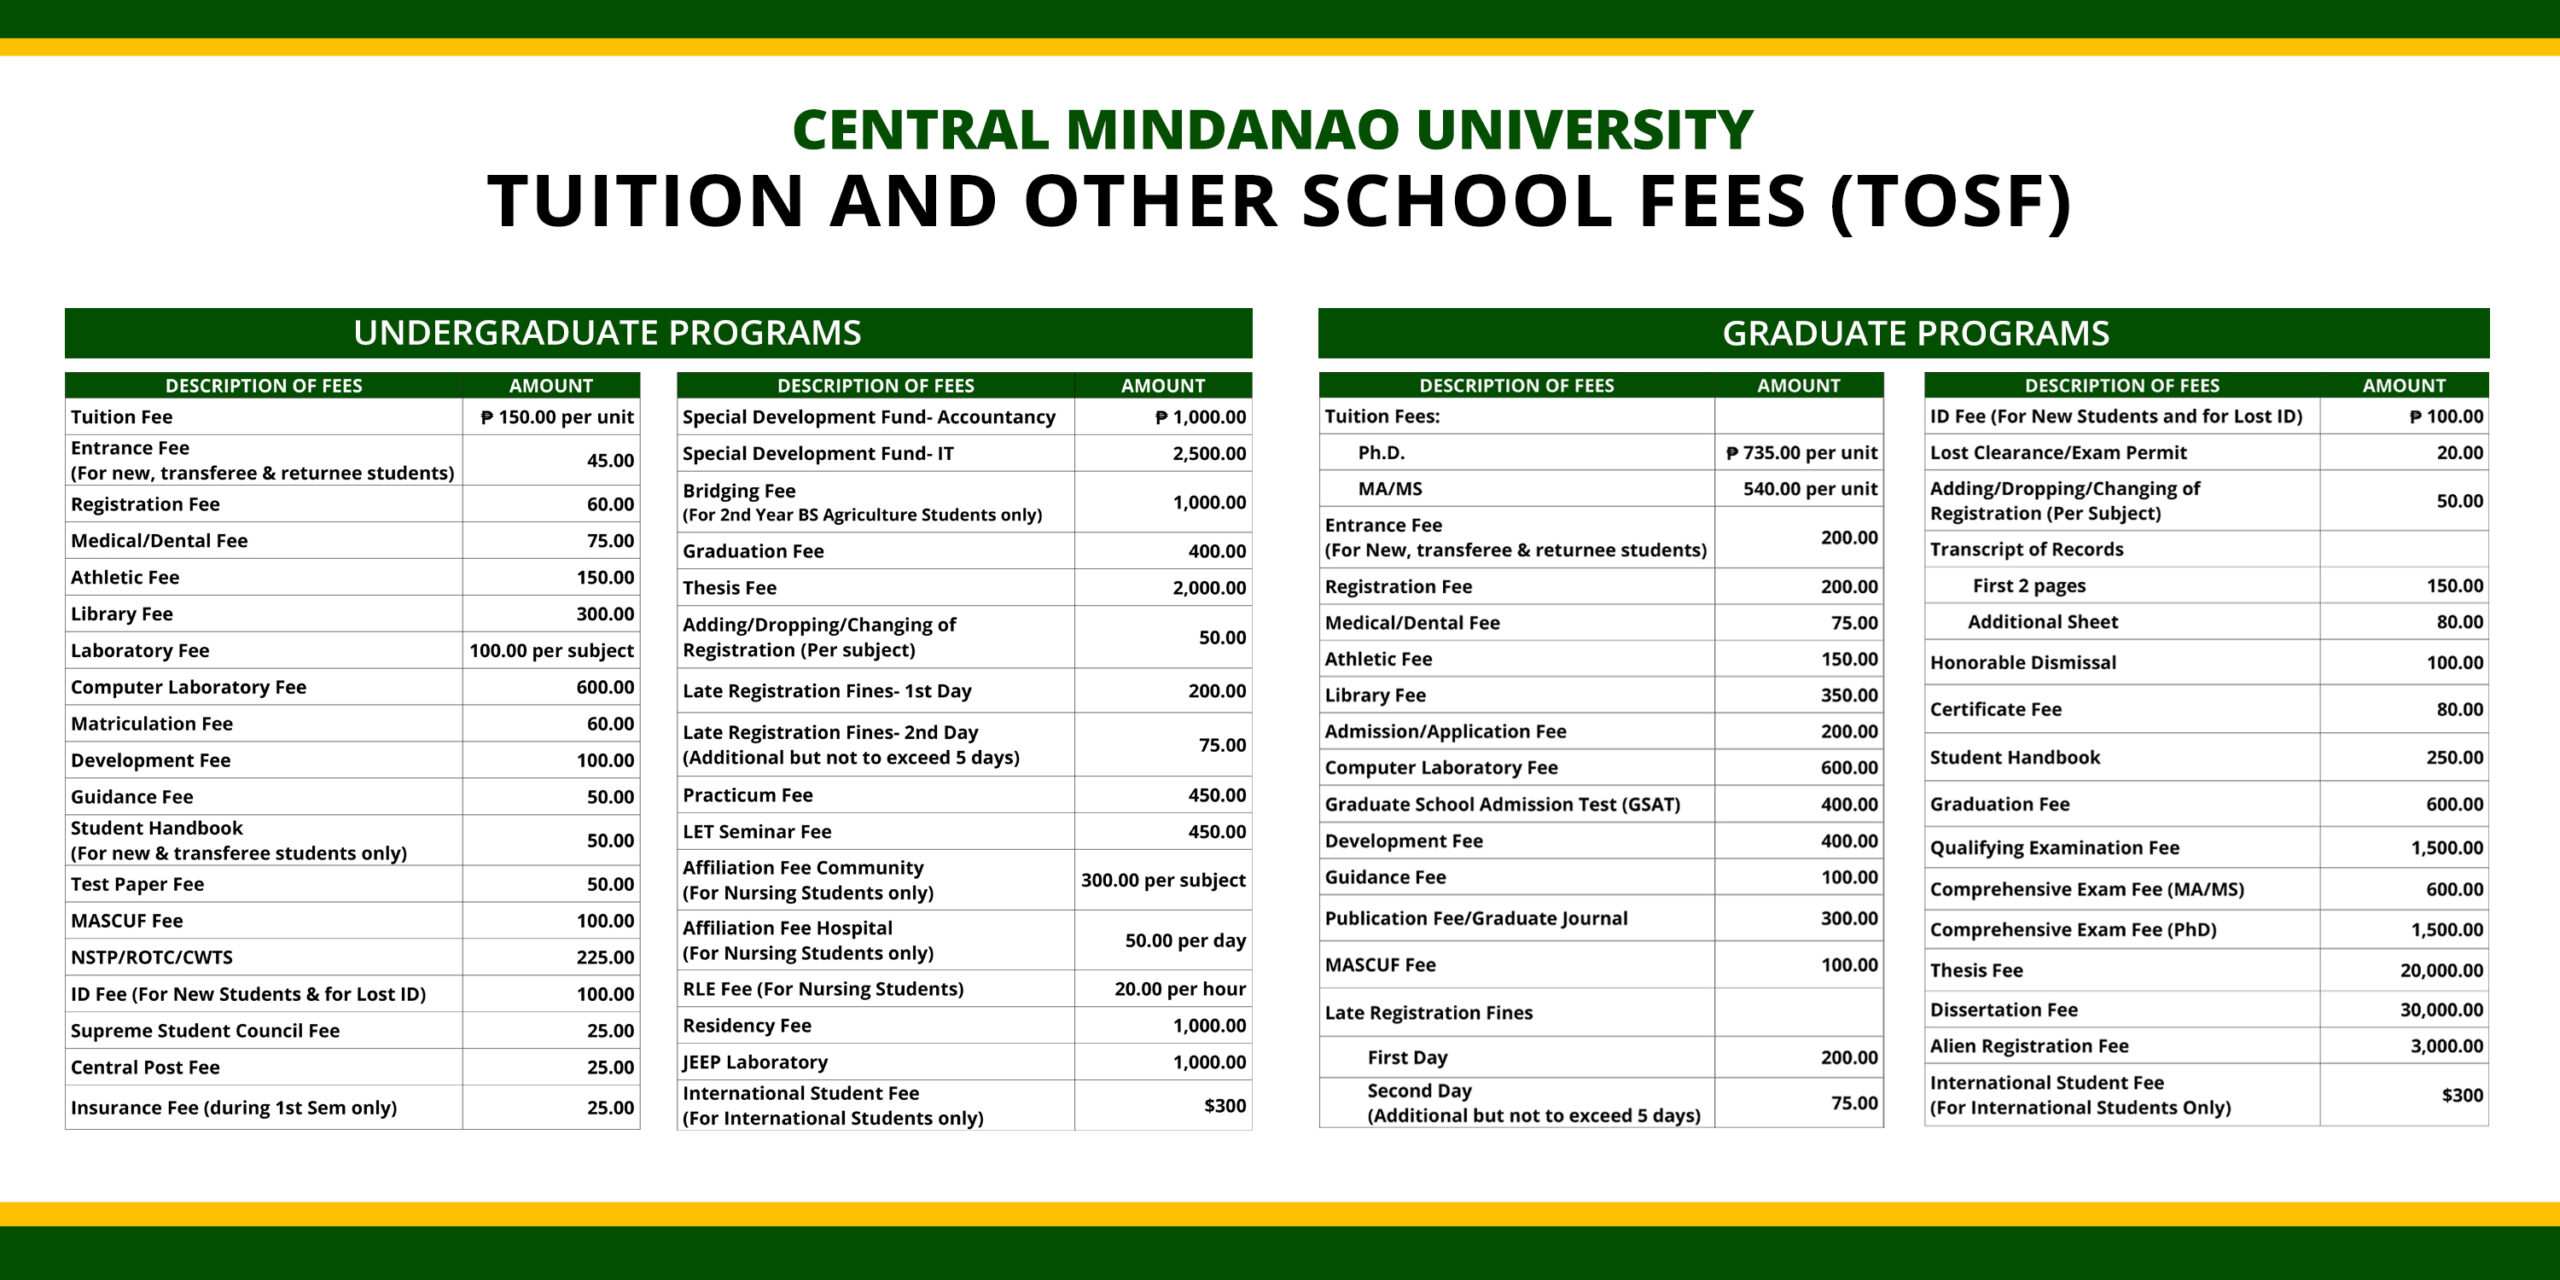 Central Mindanao University. University of Luxembourg Tuition fee. Tuition fee вопрос. California Baptist University Tuition fee. University tuition fees